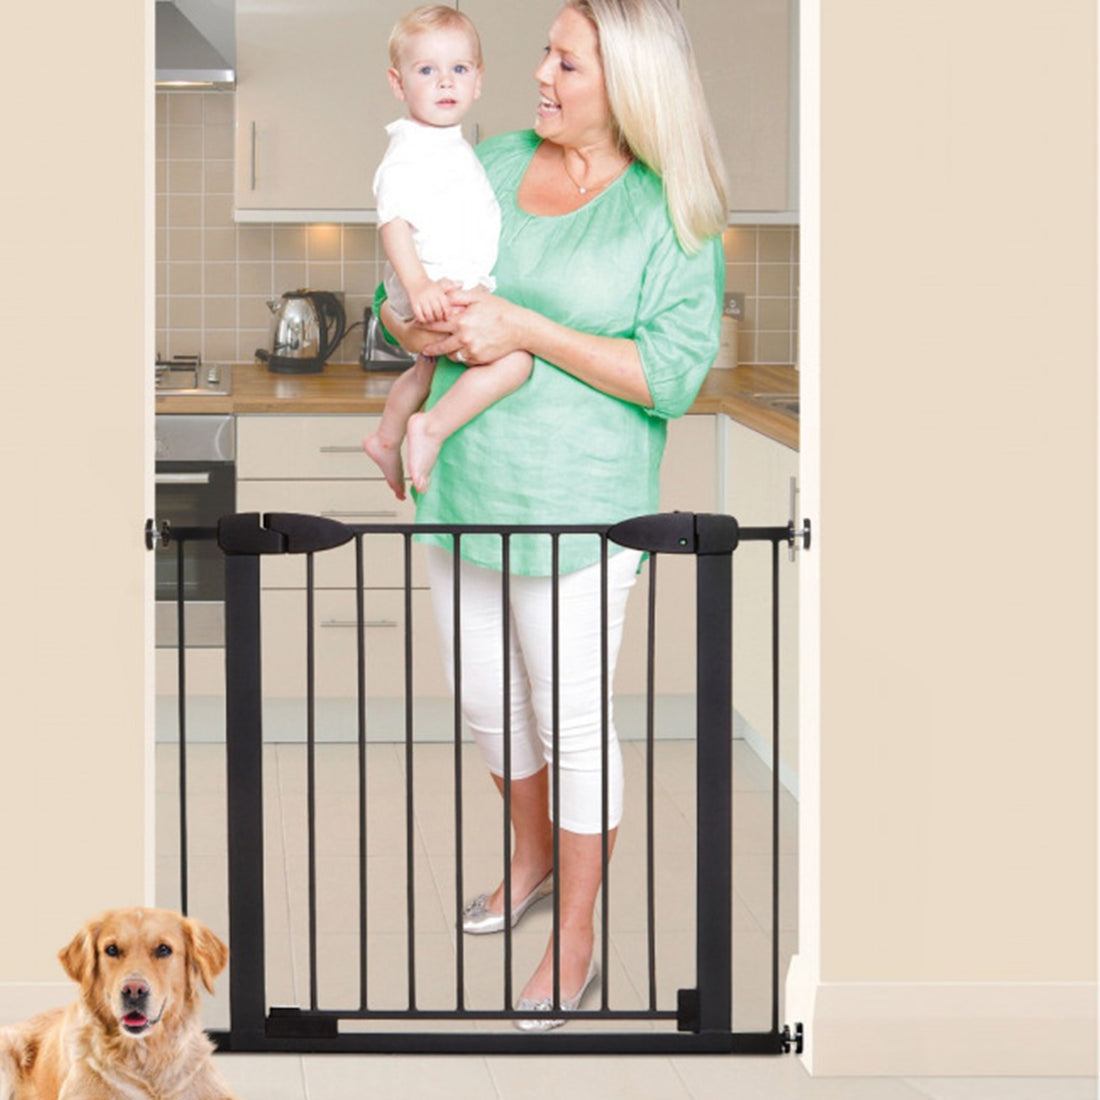 Boston Magnetic Auto-Close Security Gate - Fits with 2 X 7cm Extensions - Black